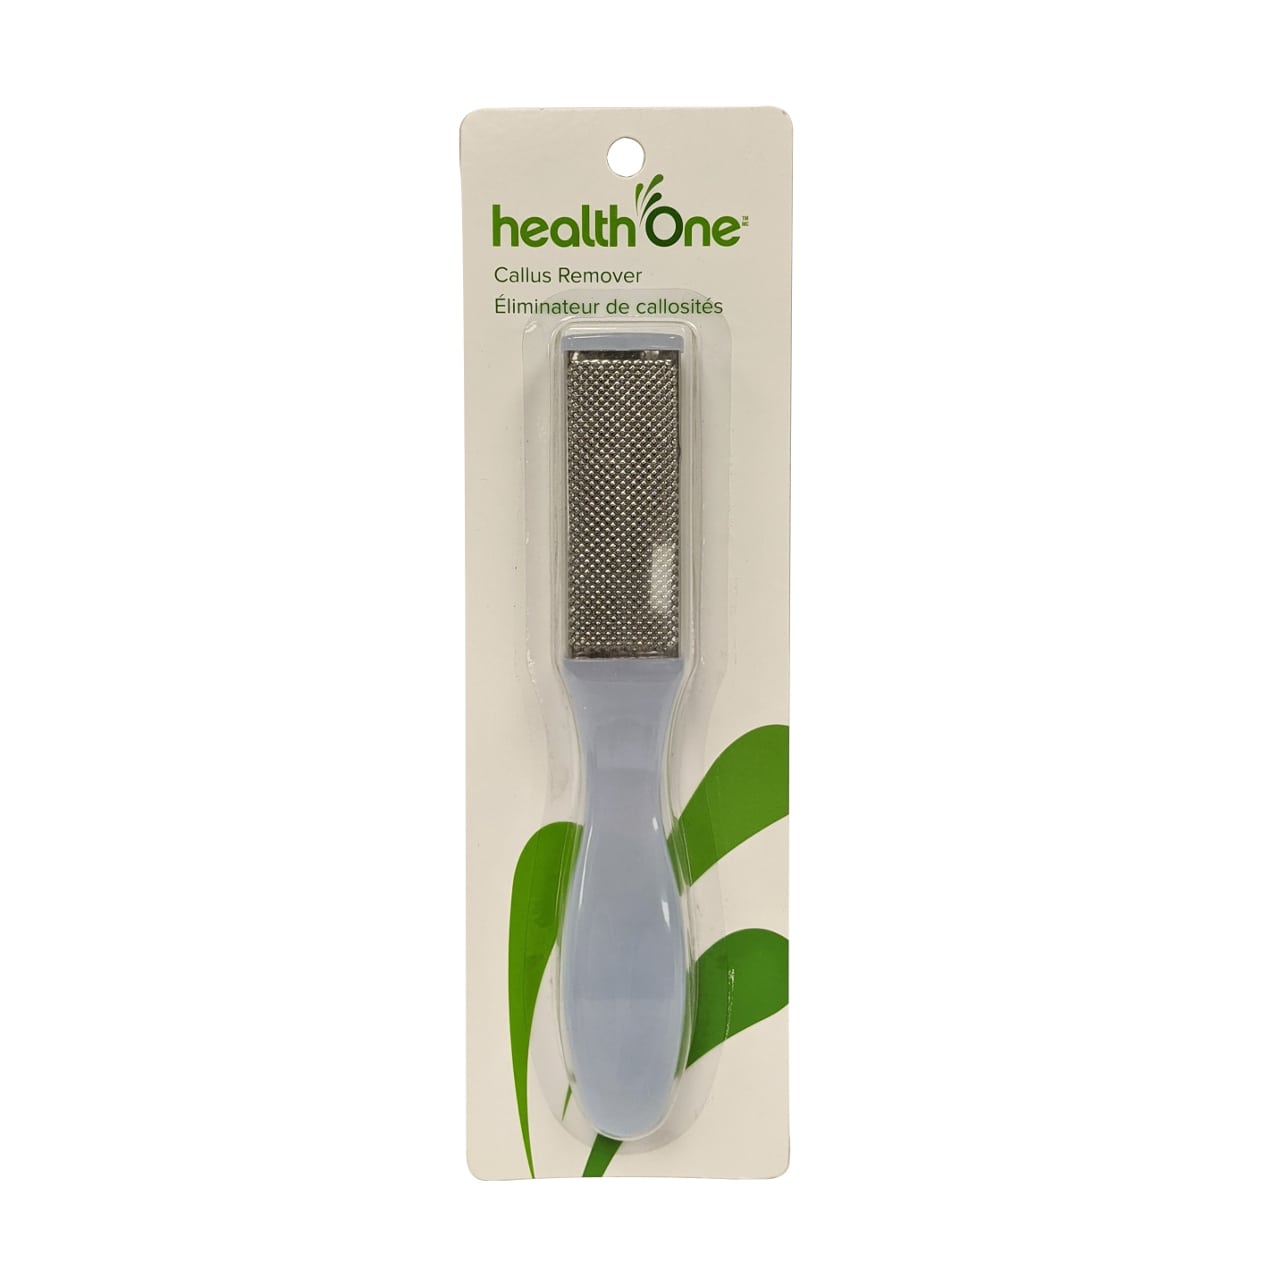 Product label for health One Callus Remover